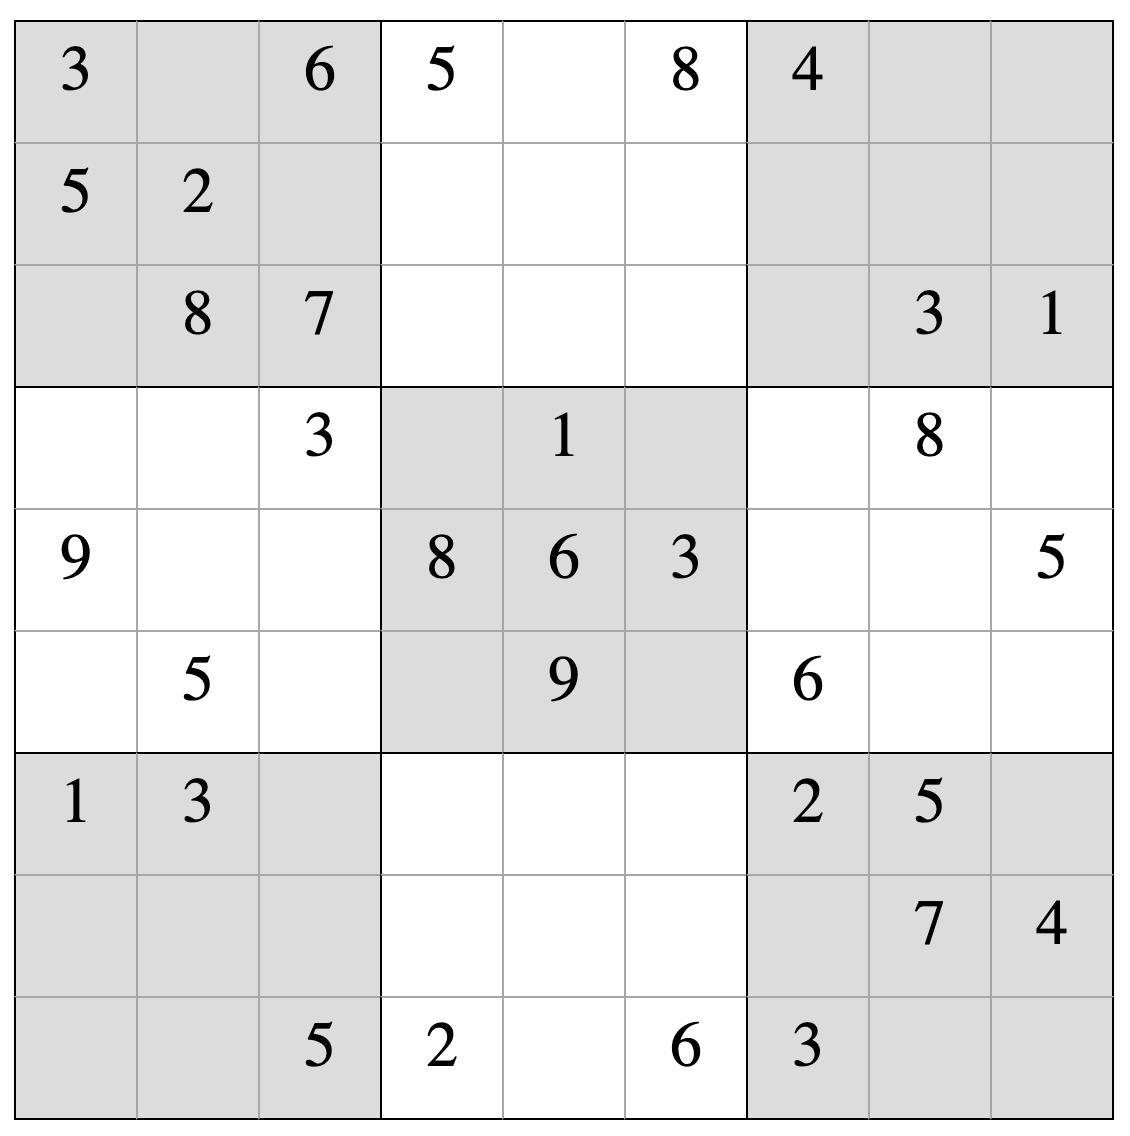 Visual Guide to solve a Game of Sudoku